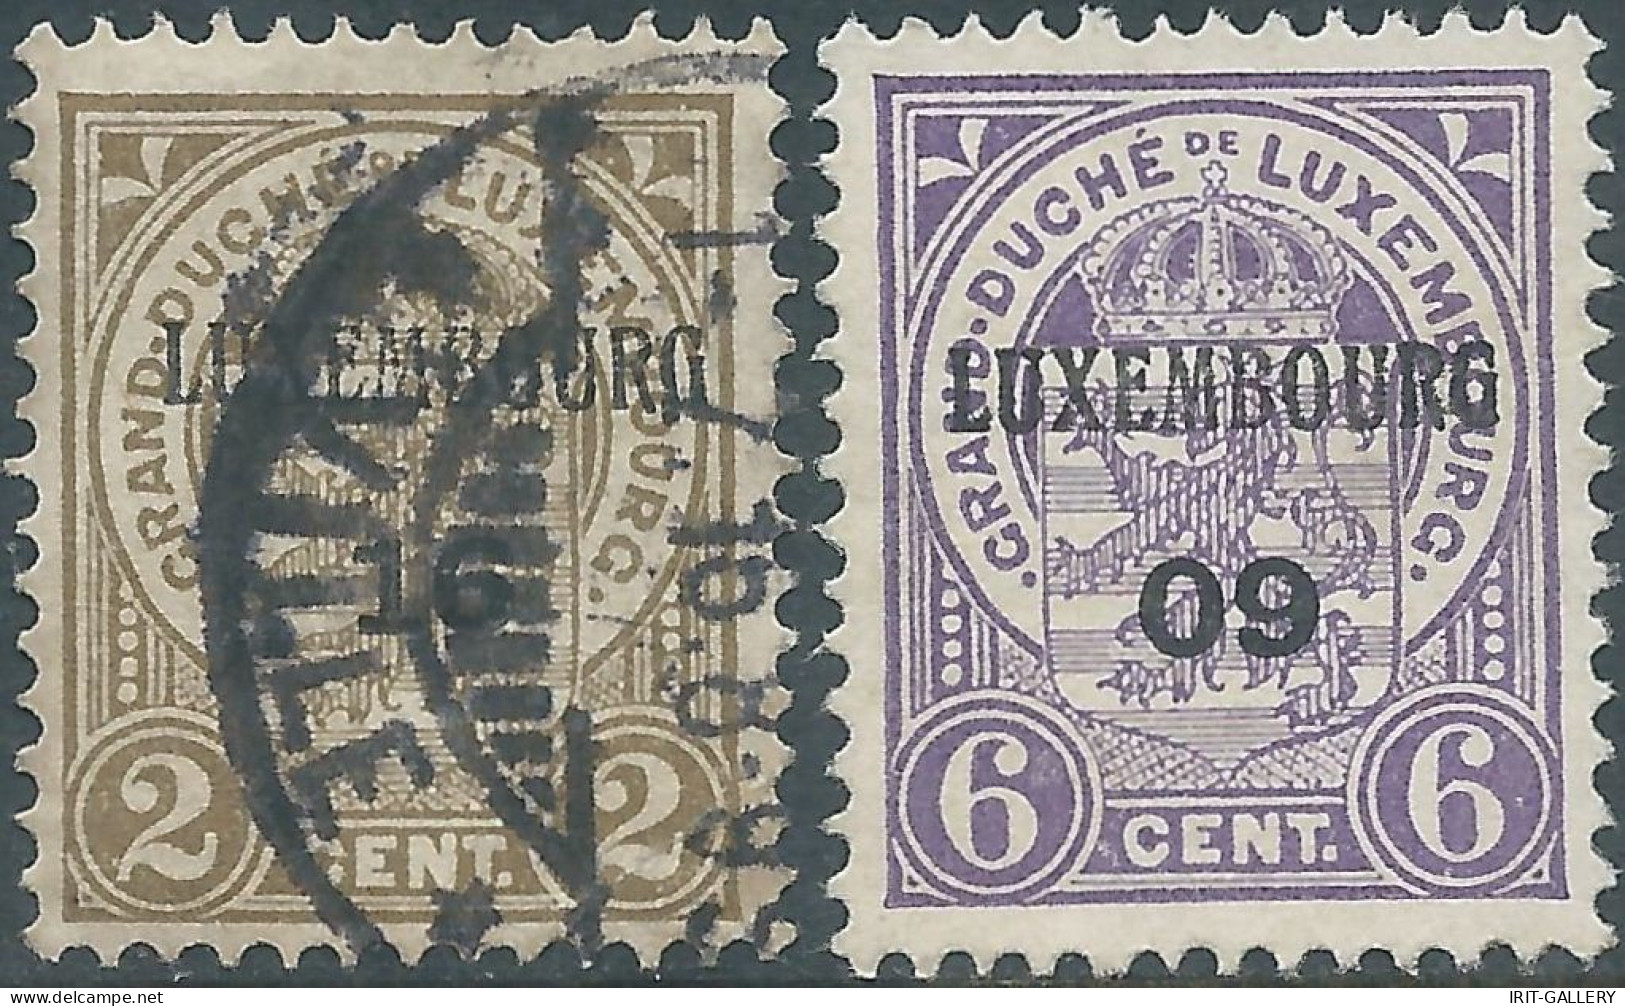 Lussemburgo - Luxembourg - 1912 Coat Of Arms,Overprinted On 2C Obliterated  & 6C Mint - 1907-24 Scudetto